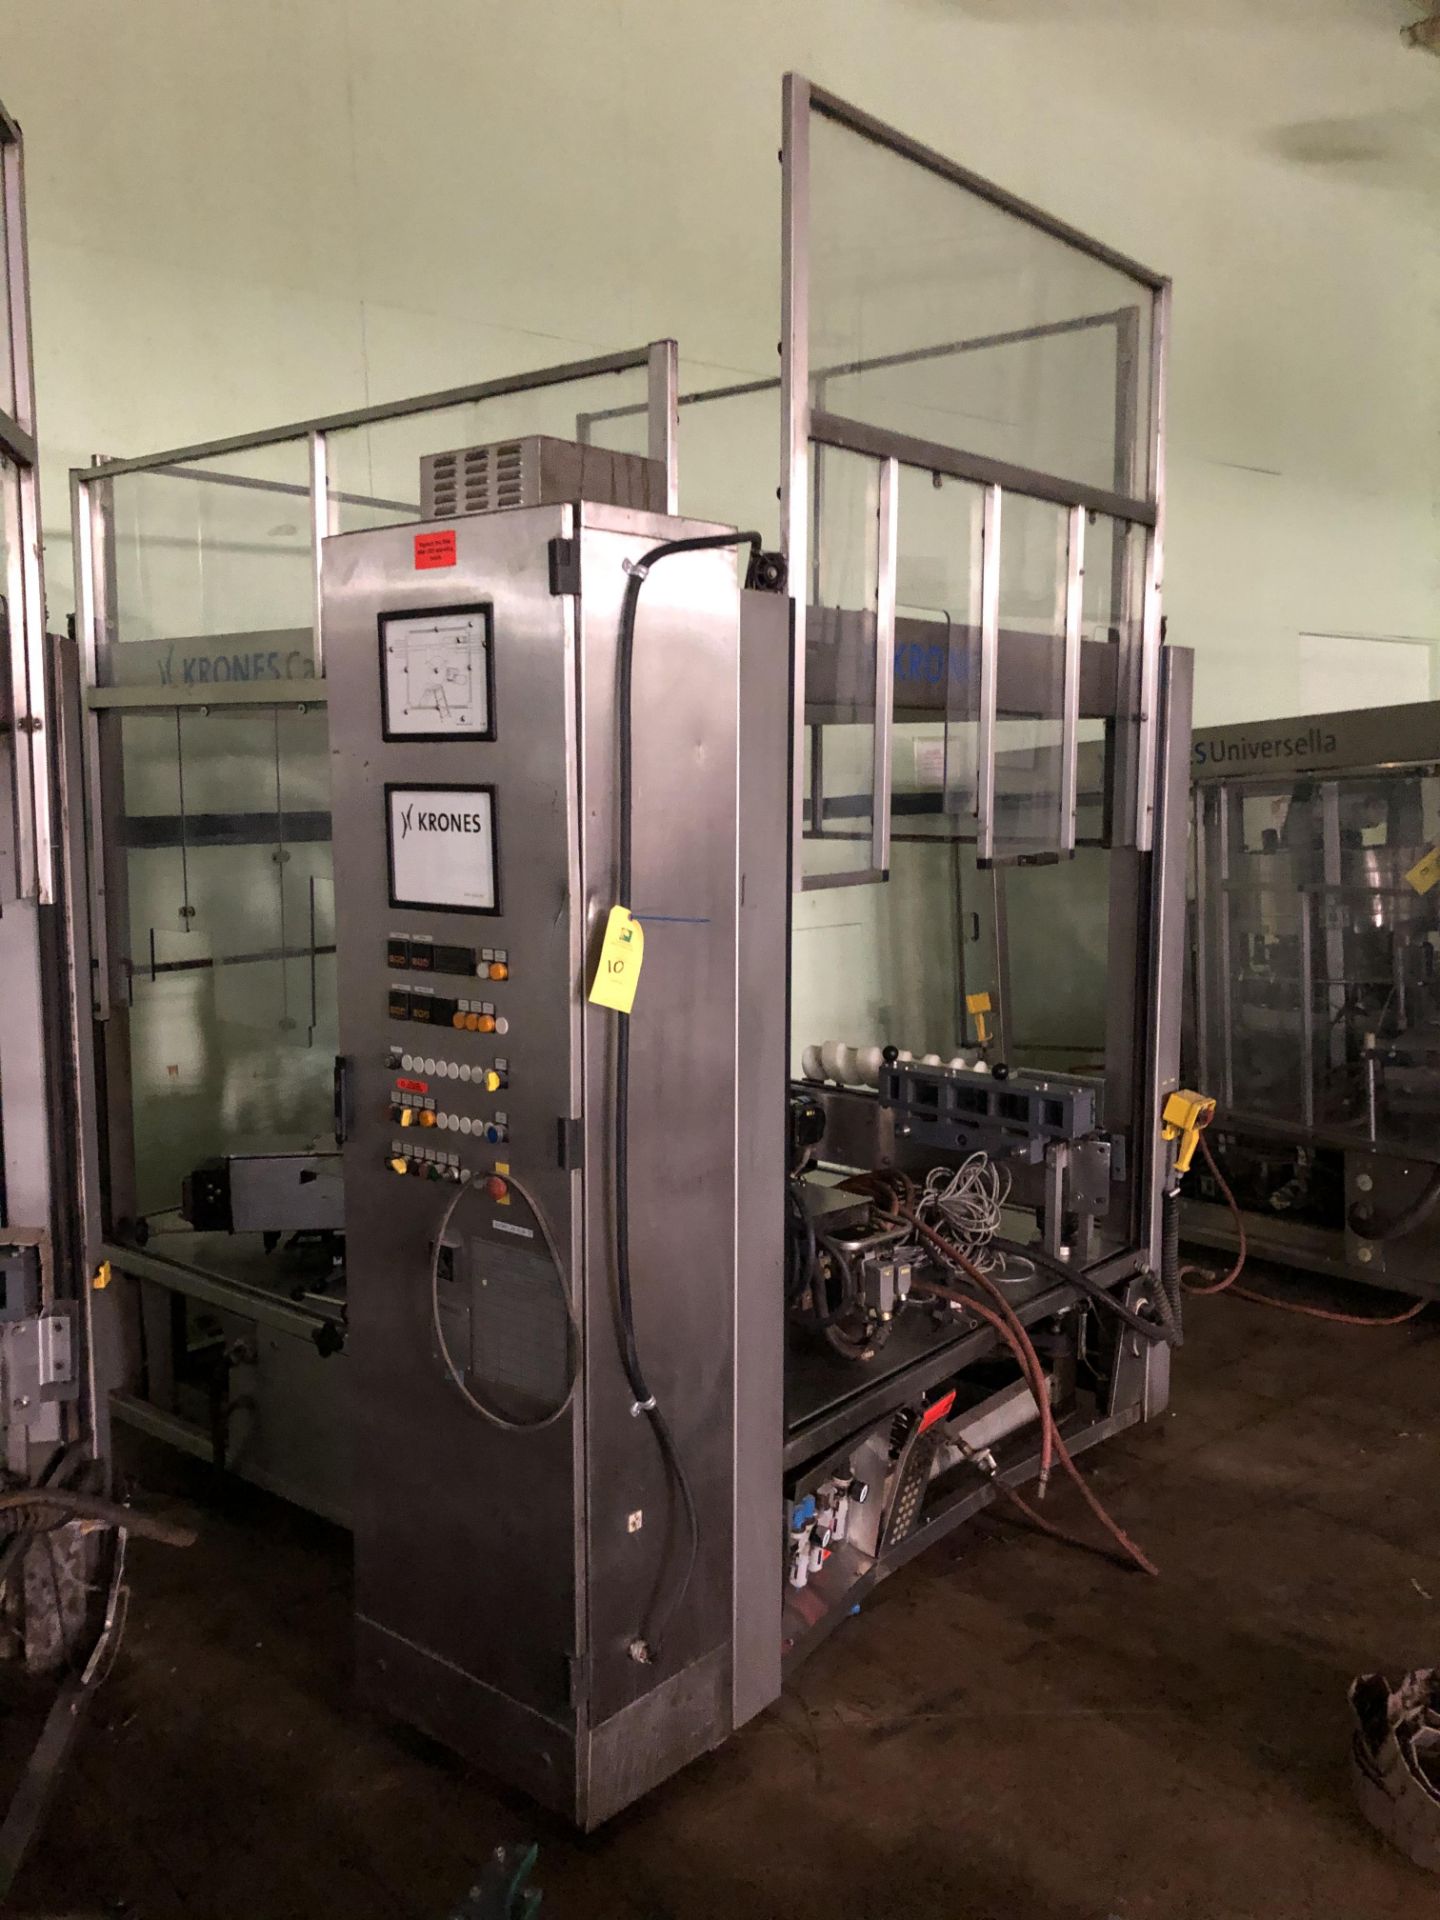 Krones Canmatic Labeler, Machine #073-Q84, RIGGING FEE - $1750 - Image 3 of 4